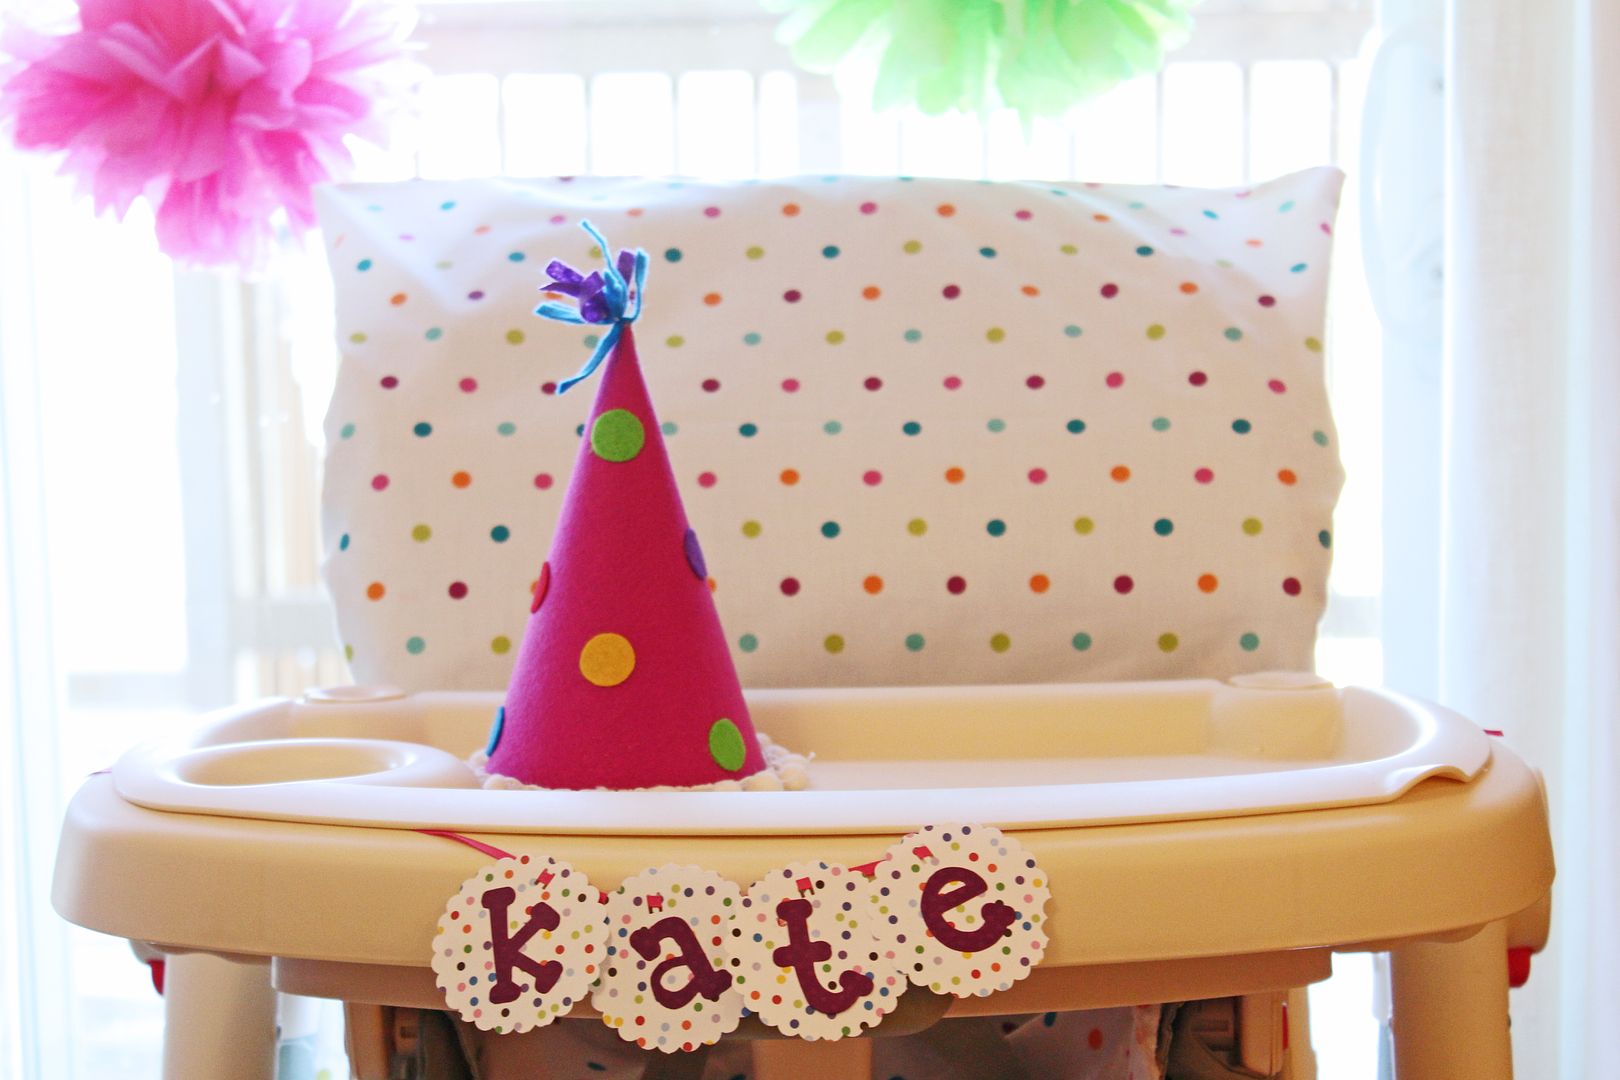 DIY high chair cover, first birthday party, colorful birthday party, tissue poms